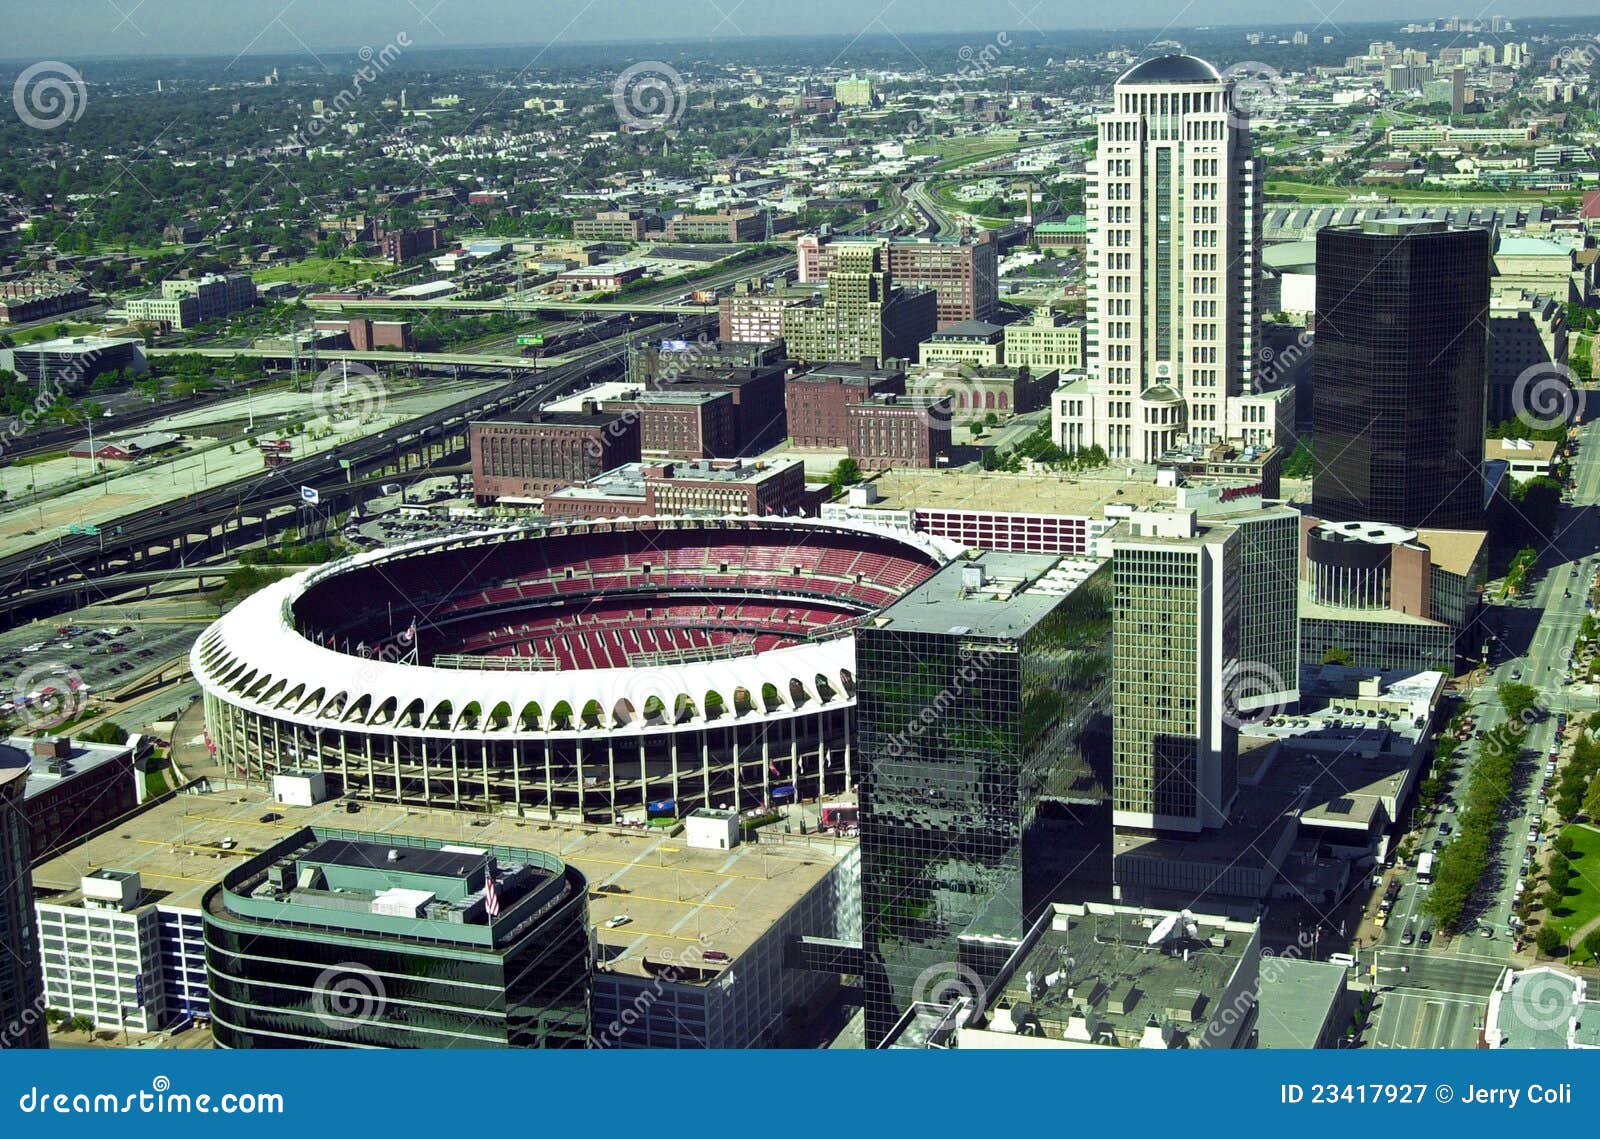 View Of Old Busch Stadium, St. Louis, MO Editorial Photography - Image: 23417927